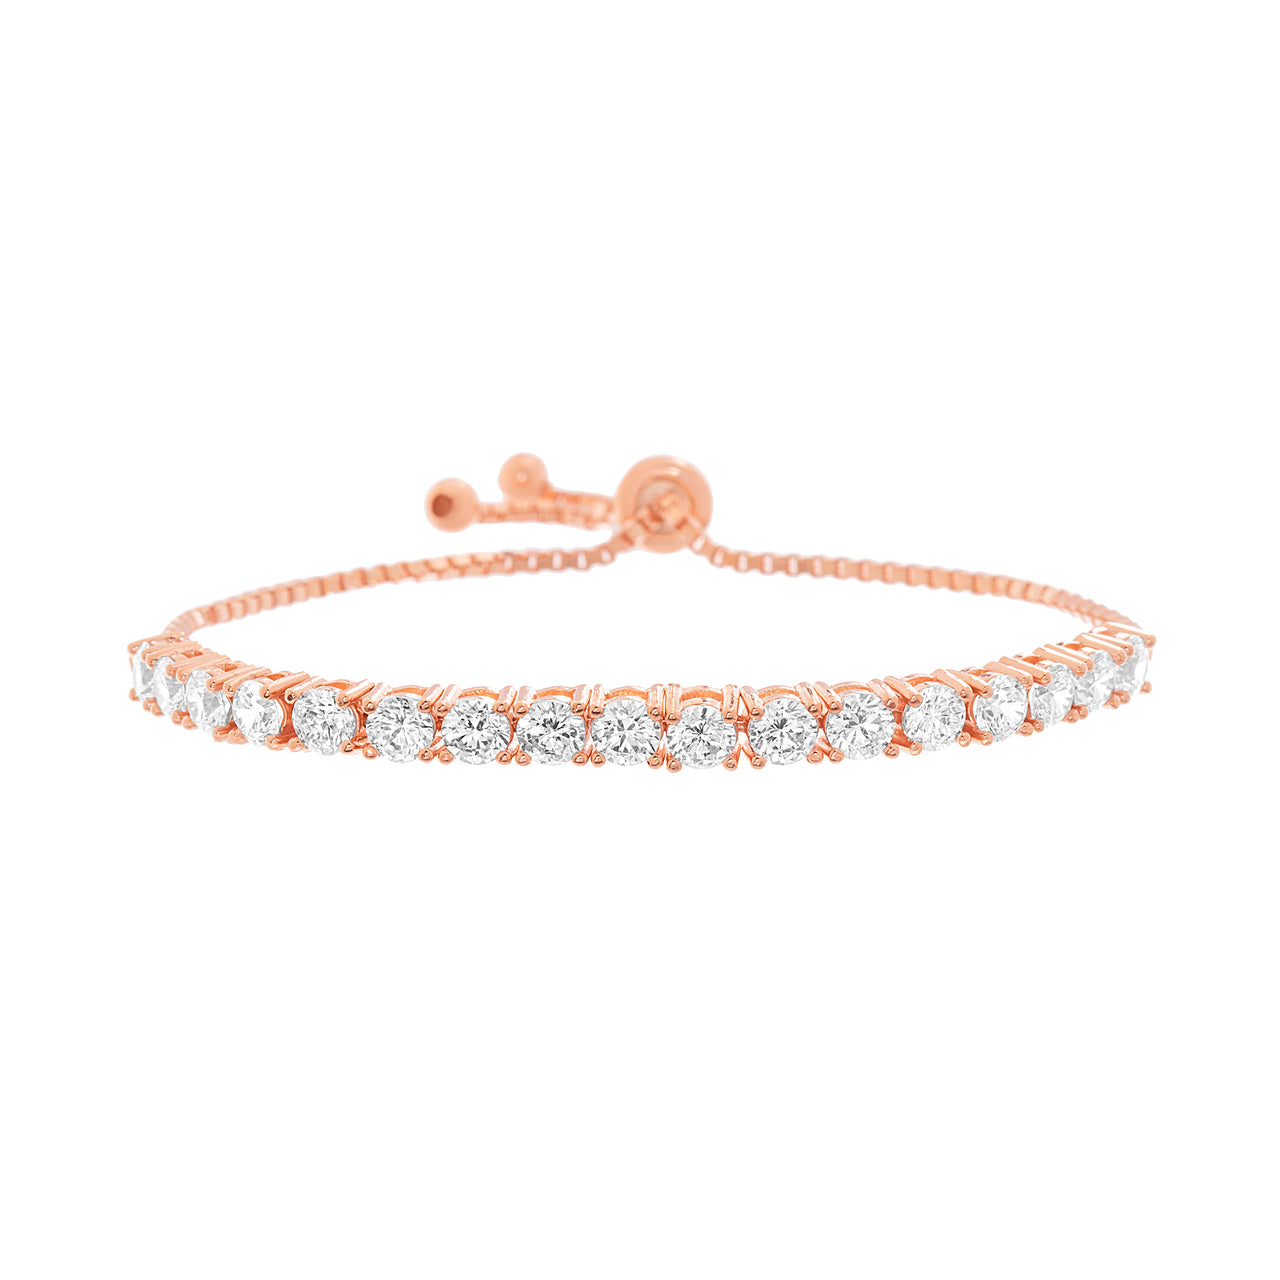 Lesa Michele Round Cubic Zirconia Adjustable Bolo Tennis Bracelet in Rose Gold Plated Sterling Silver